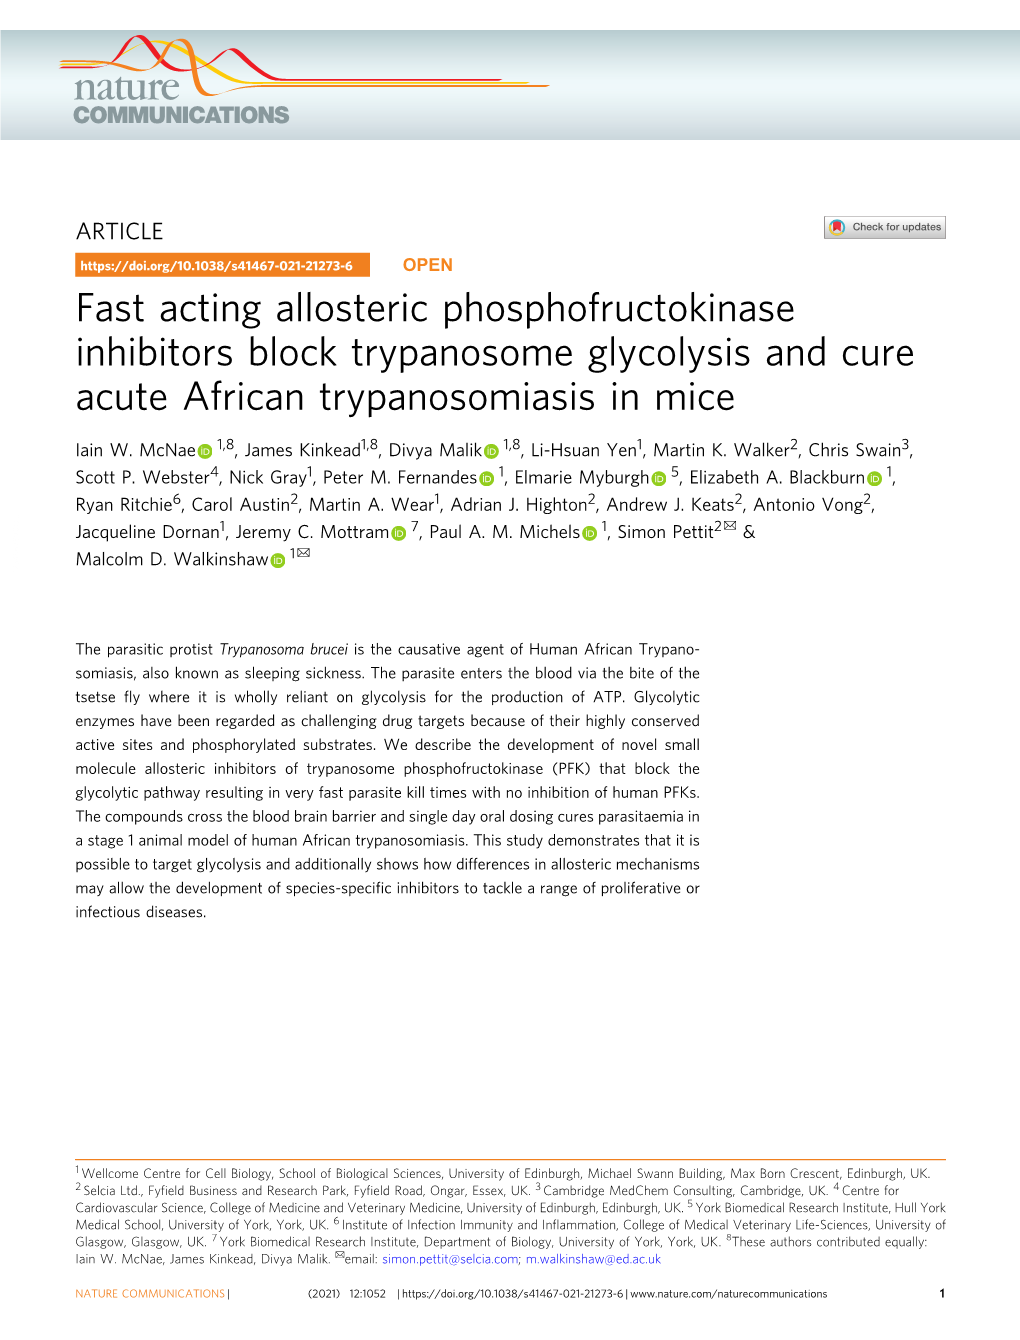 Fast Acting Allosteric Phosphofructokinase Inhibitors Block Trypanosome Glycolysis and Cure Acute African Trypanosomiasis in Mice